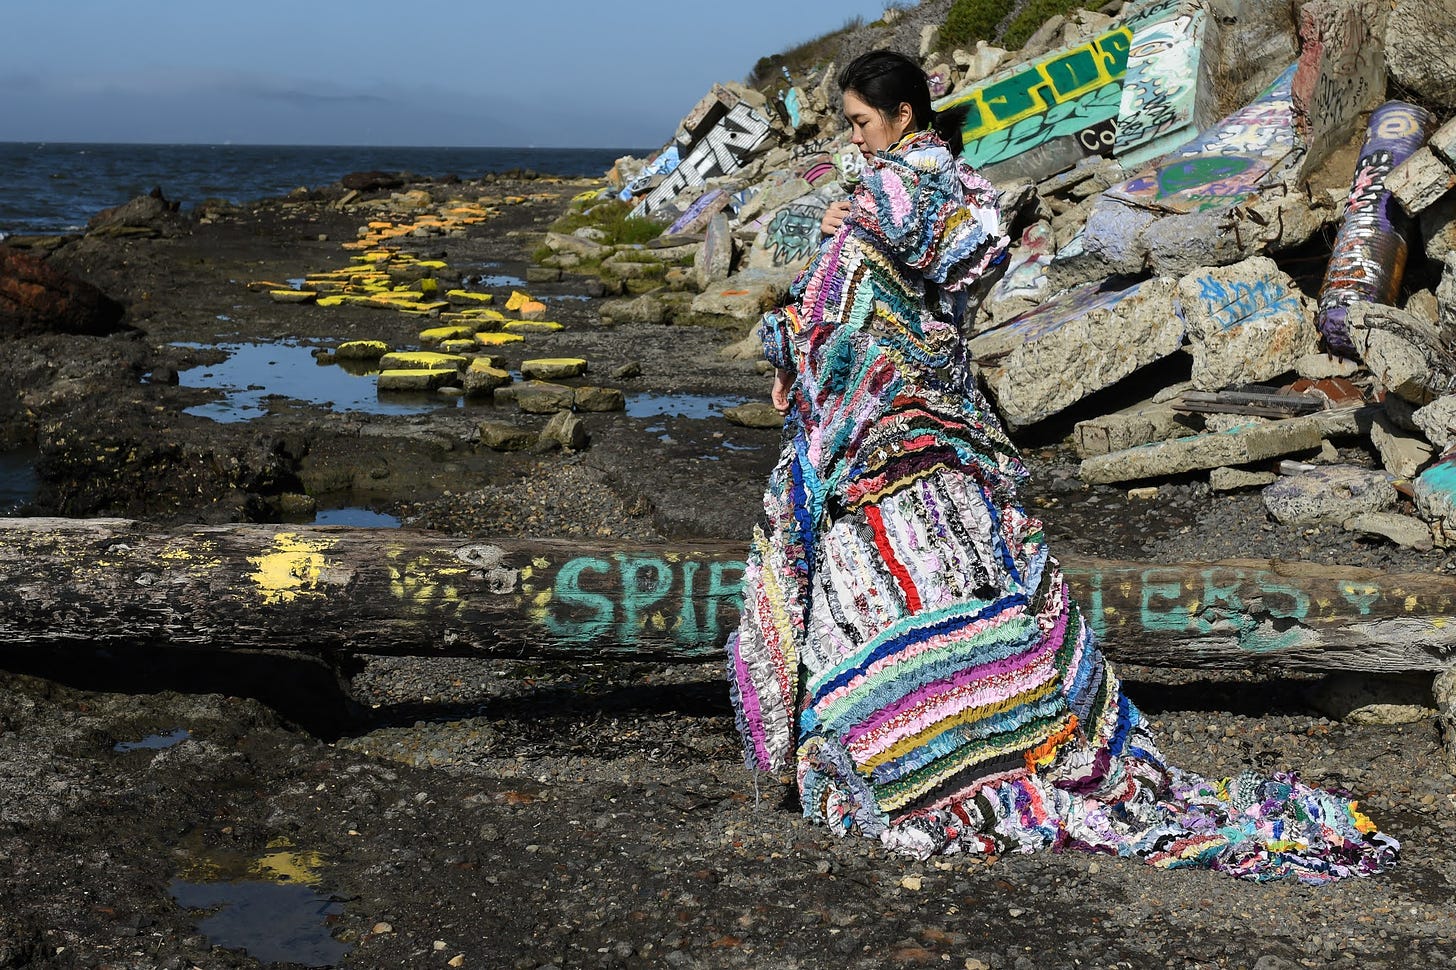 Woman wearing a dress made of recycled gathered cloths by Mira Musank standing on a rocky shore